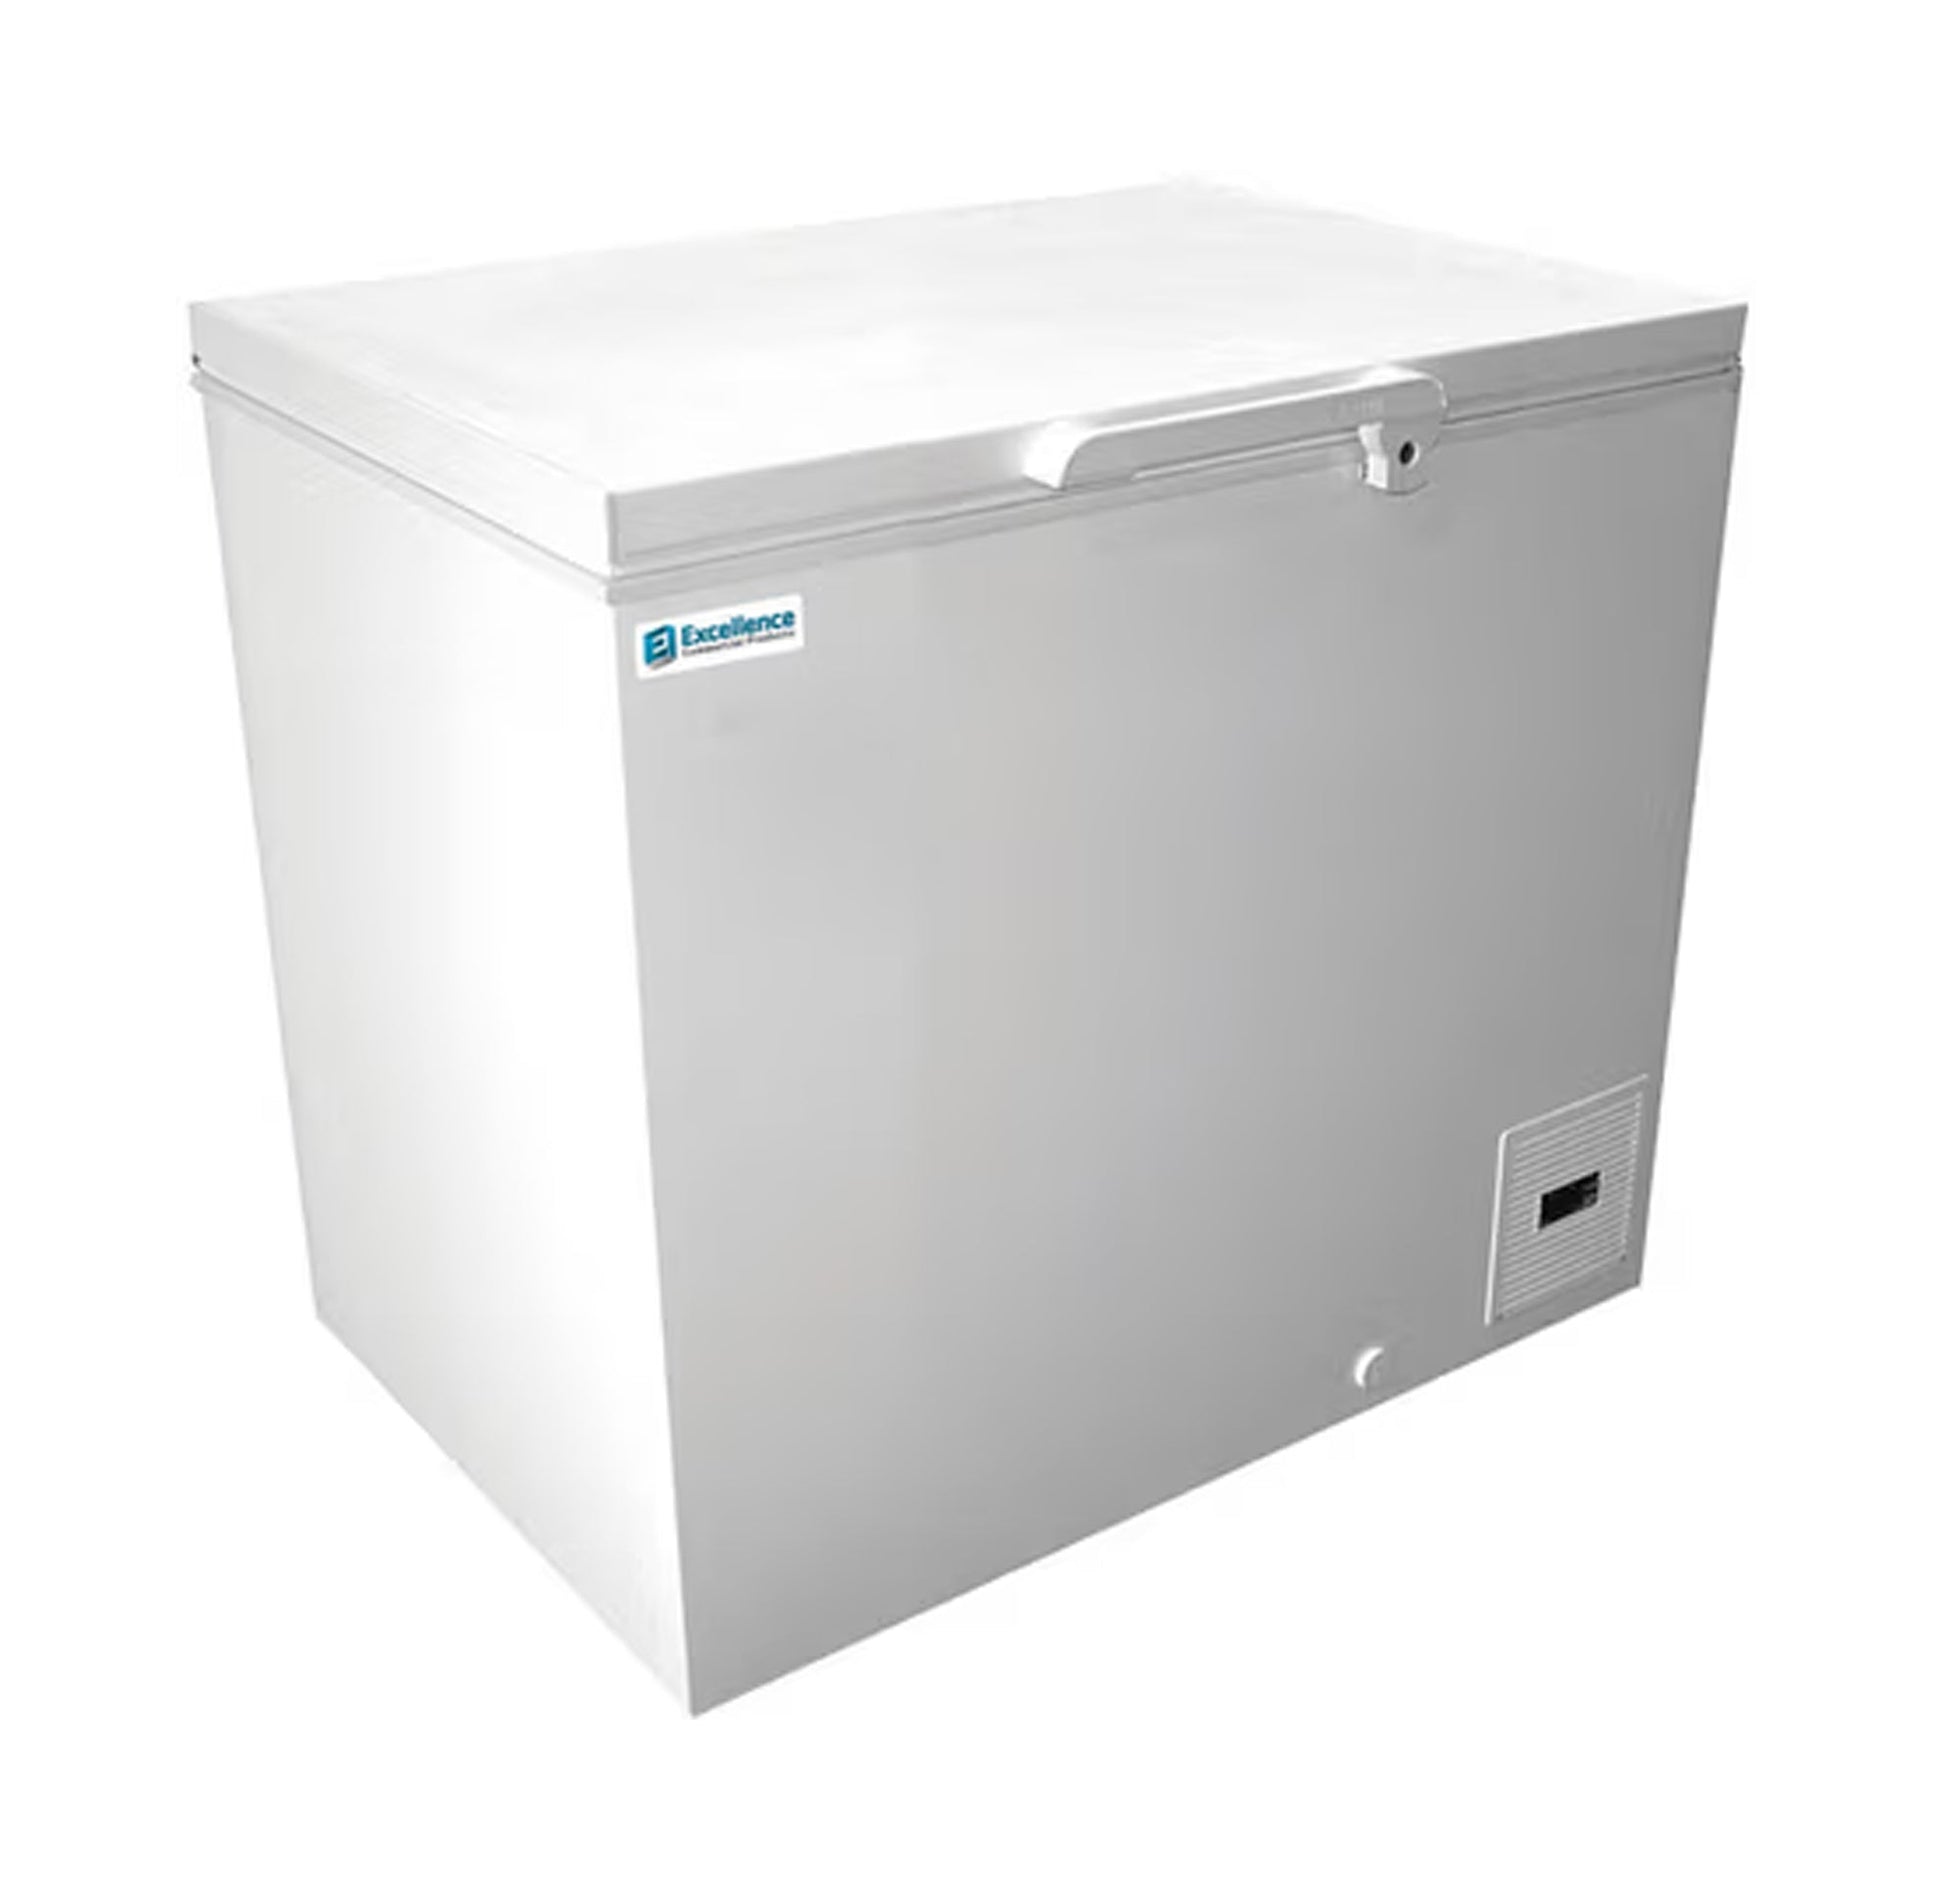 Excellence Industries UCS-41HC  SPECS Voltage/Herts: 115 Volts / 60 Herts Width: 41-1/2″ Inches Depth: 25-3/4″ Inches Height: 34″ Inches Capacity: 8.6cu. ft. Compressor: Bottom Mounted Temperature: -50°F to +15° Degrees F Shelves: Sections: 1 UL-C / UL-US Certified: Yes